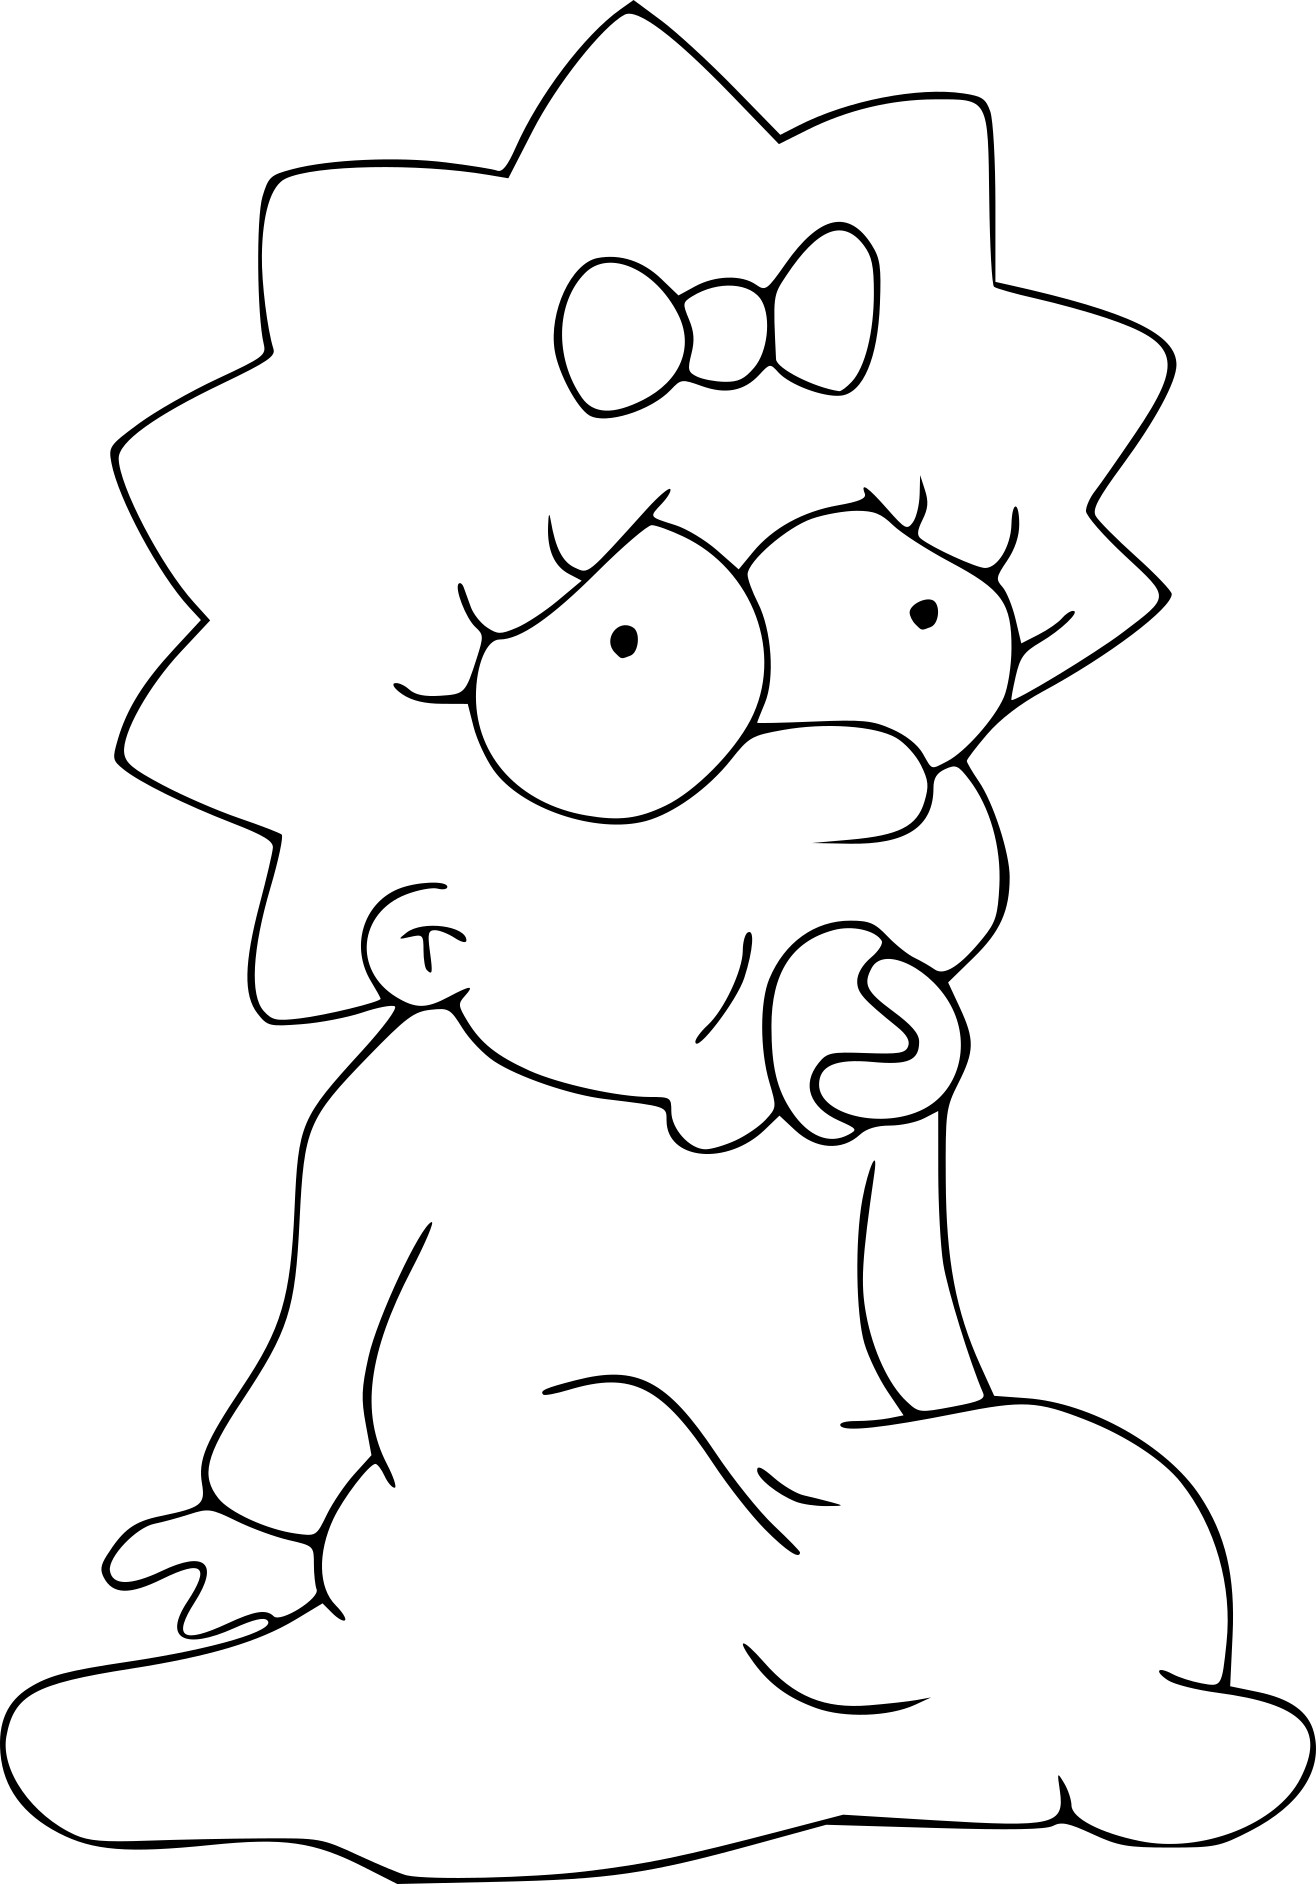 Maggie Simpson drawing and coloring page